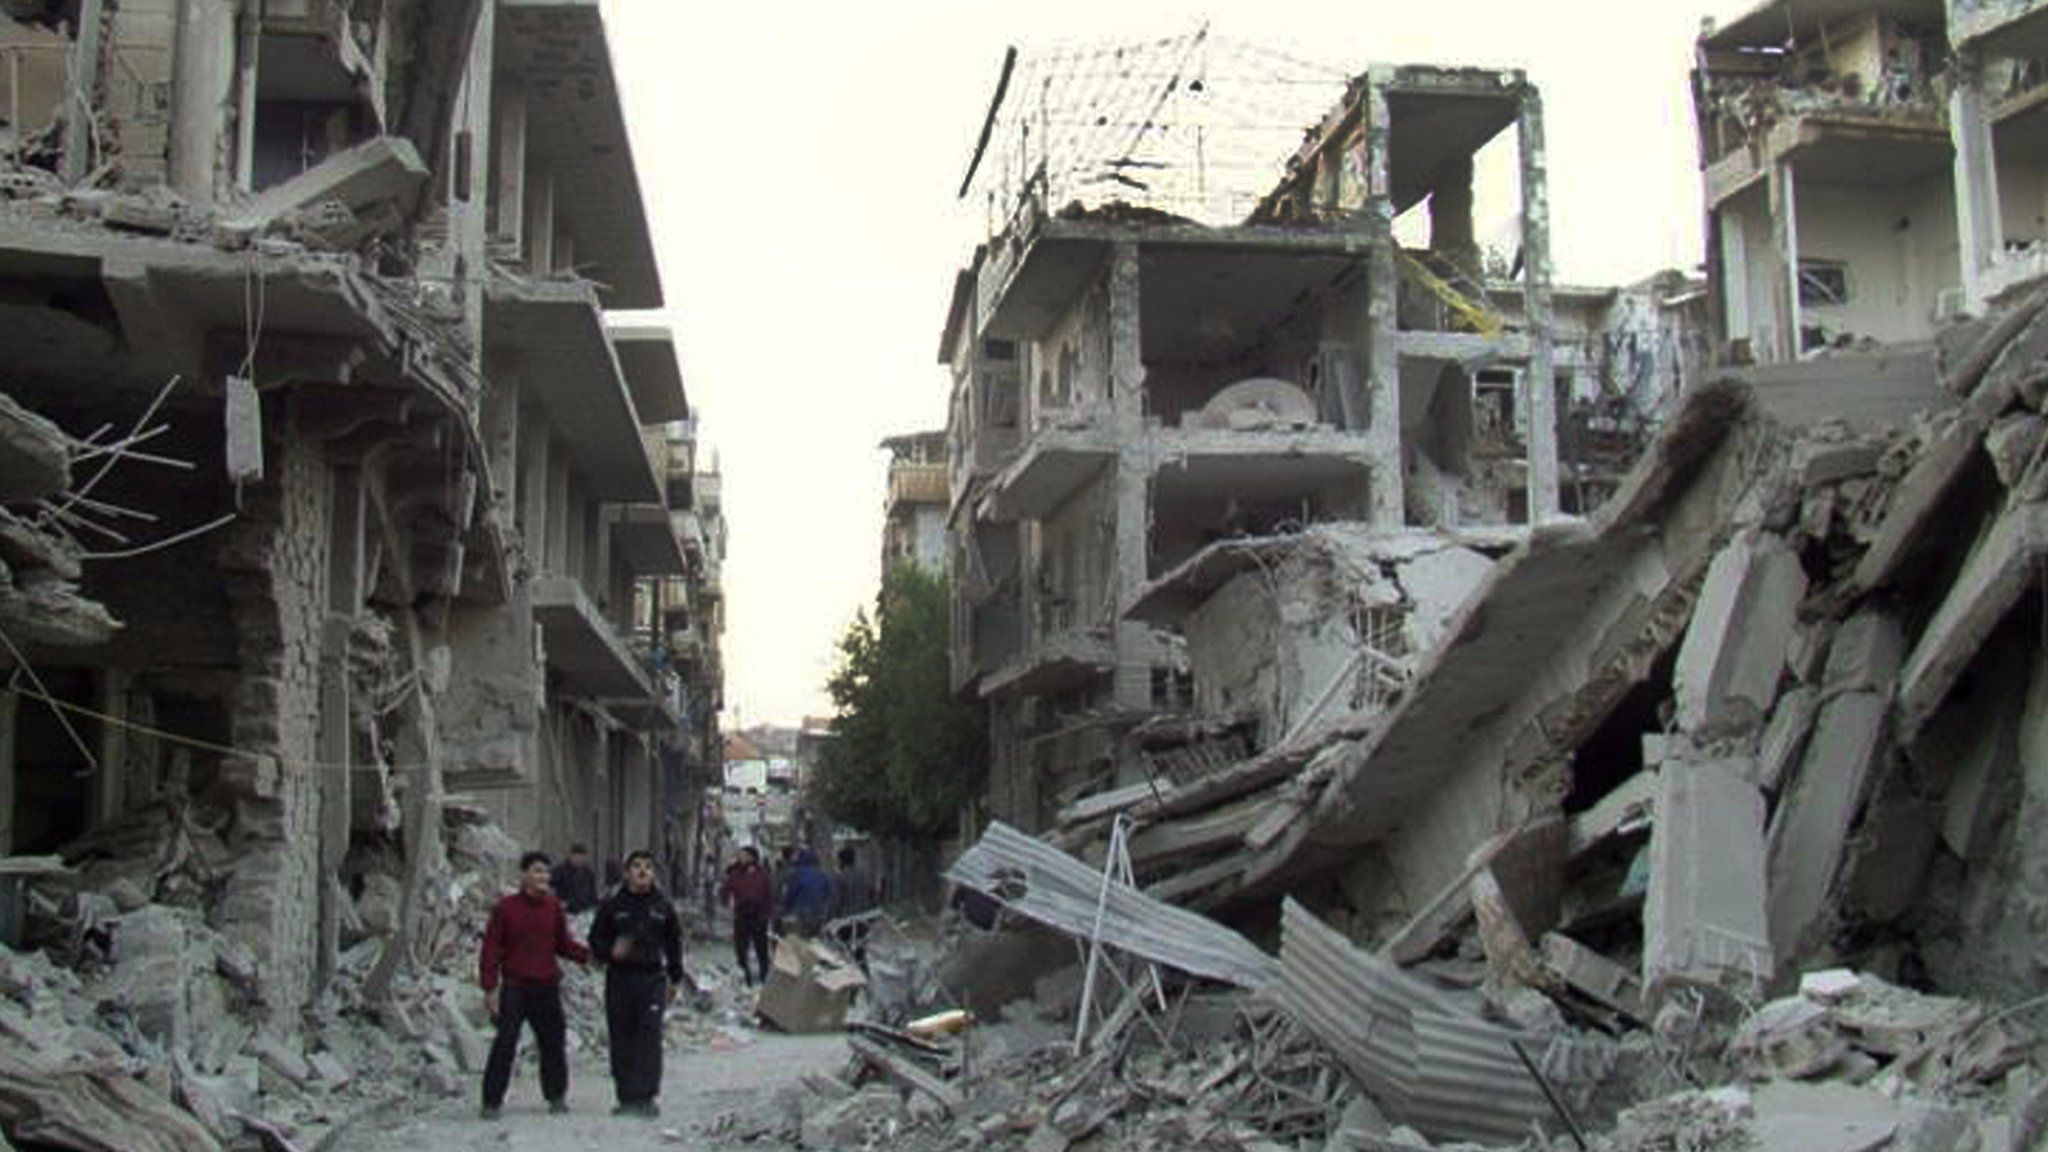 Residents of Syrian city of Homs surrounded by rubble